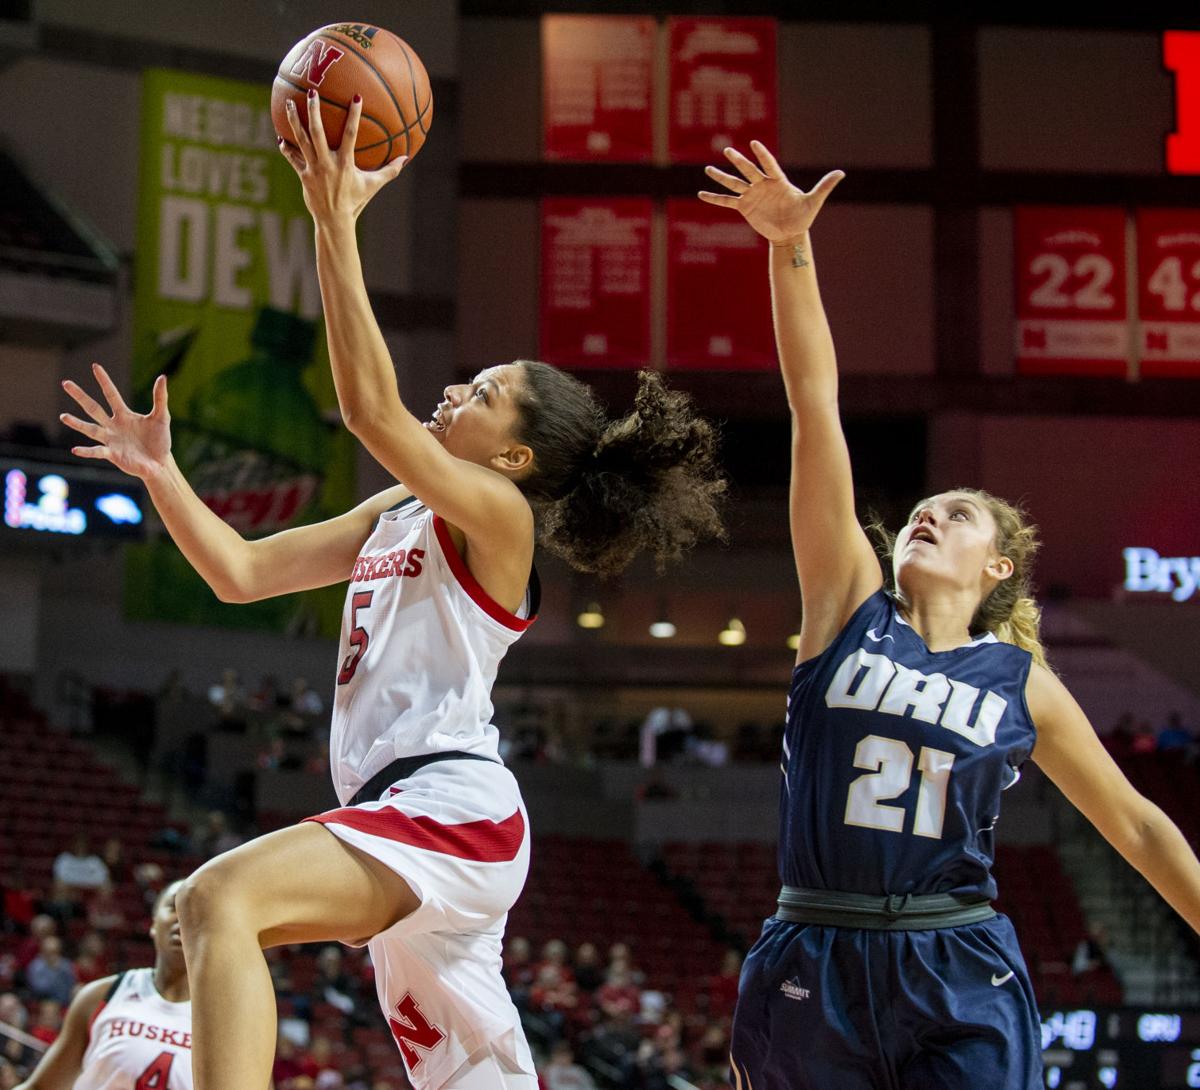 After long layoff, Husker women use defense to overcome ...